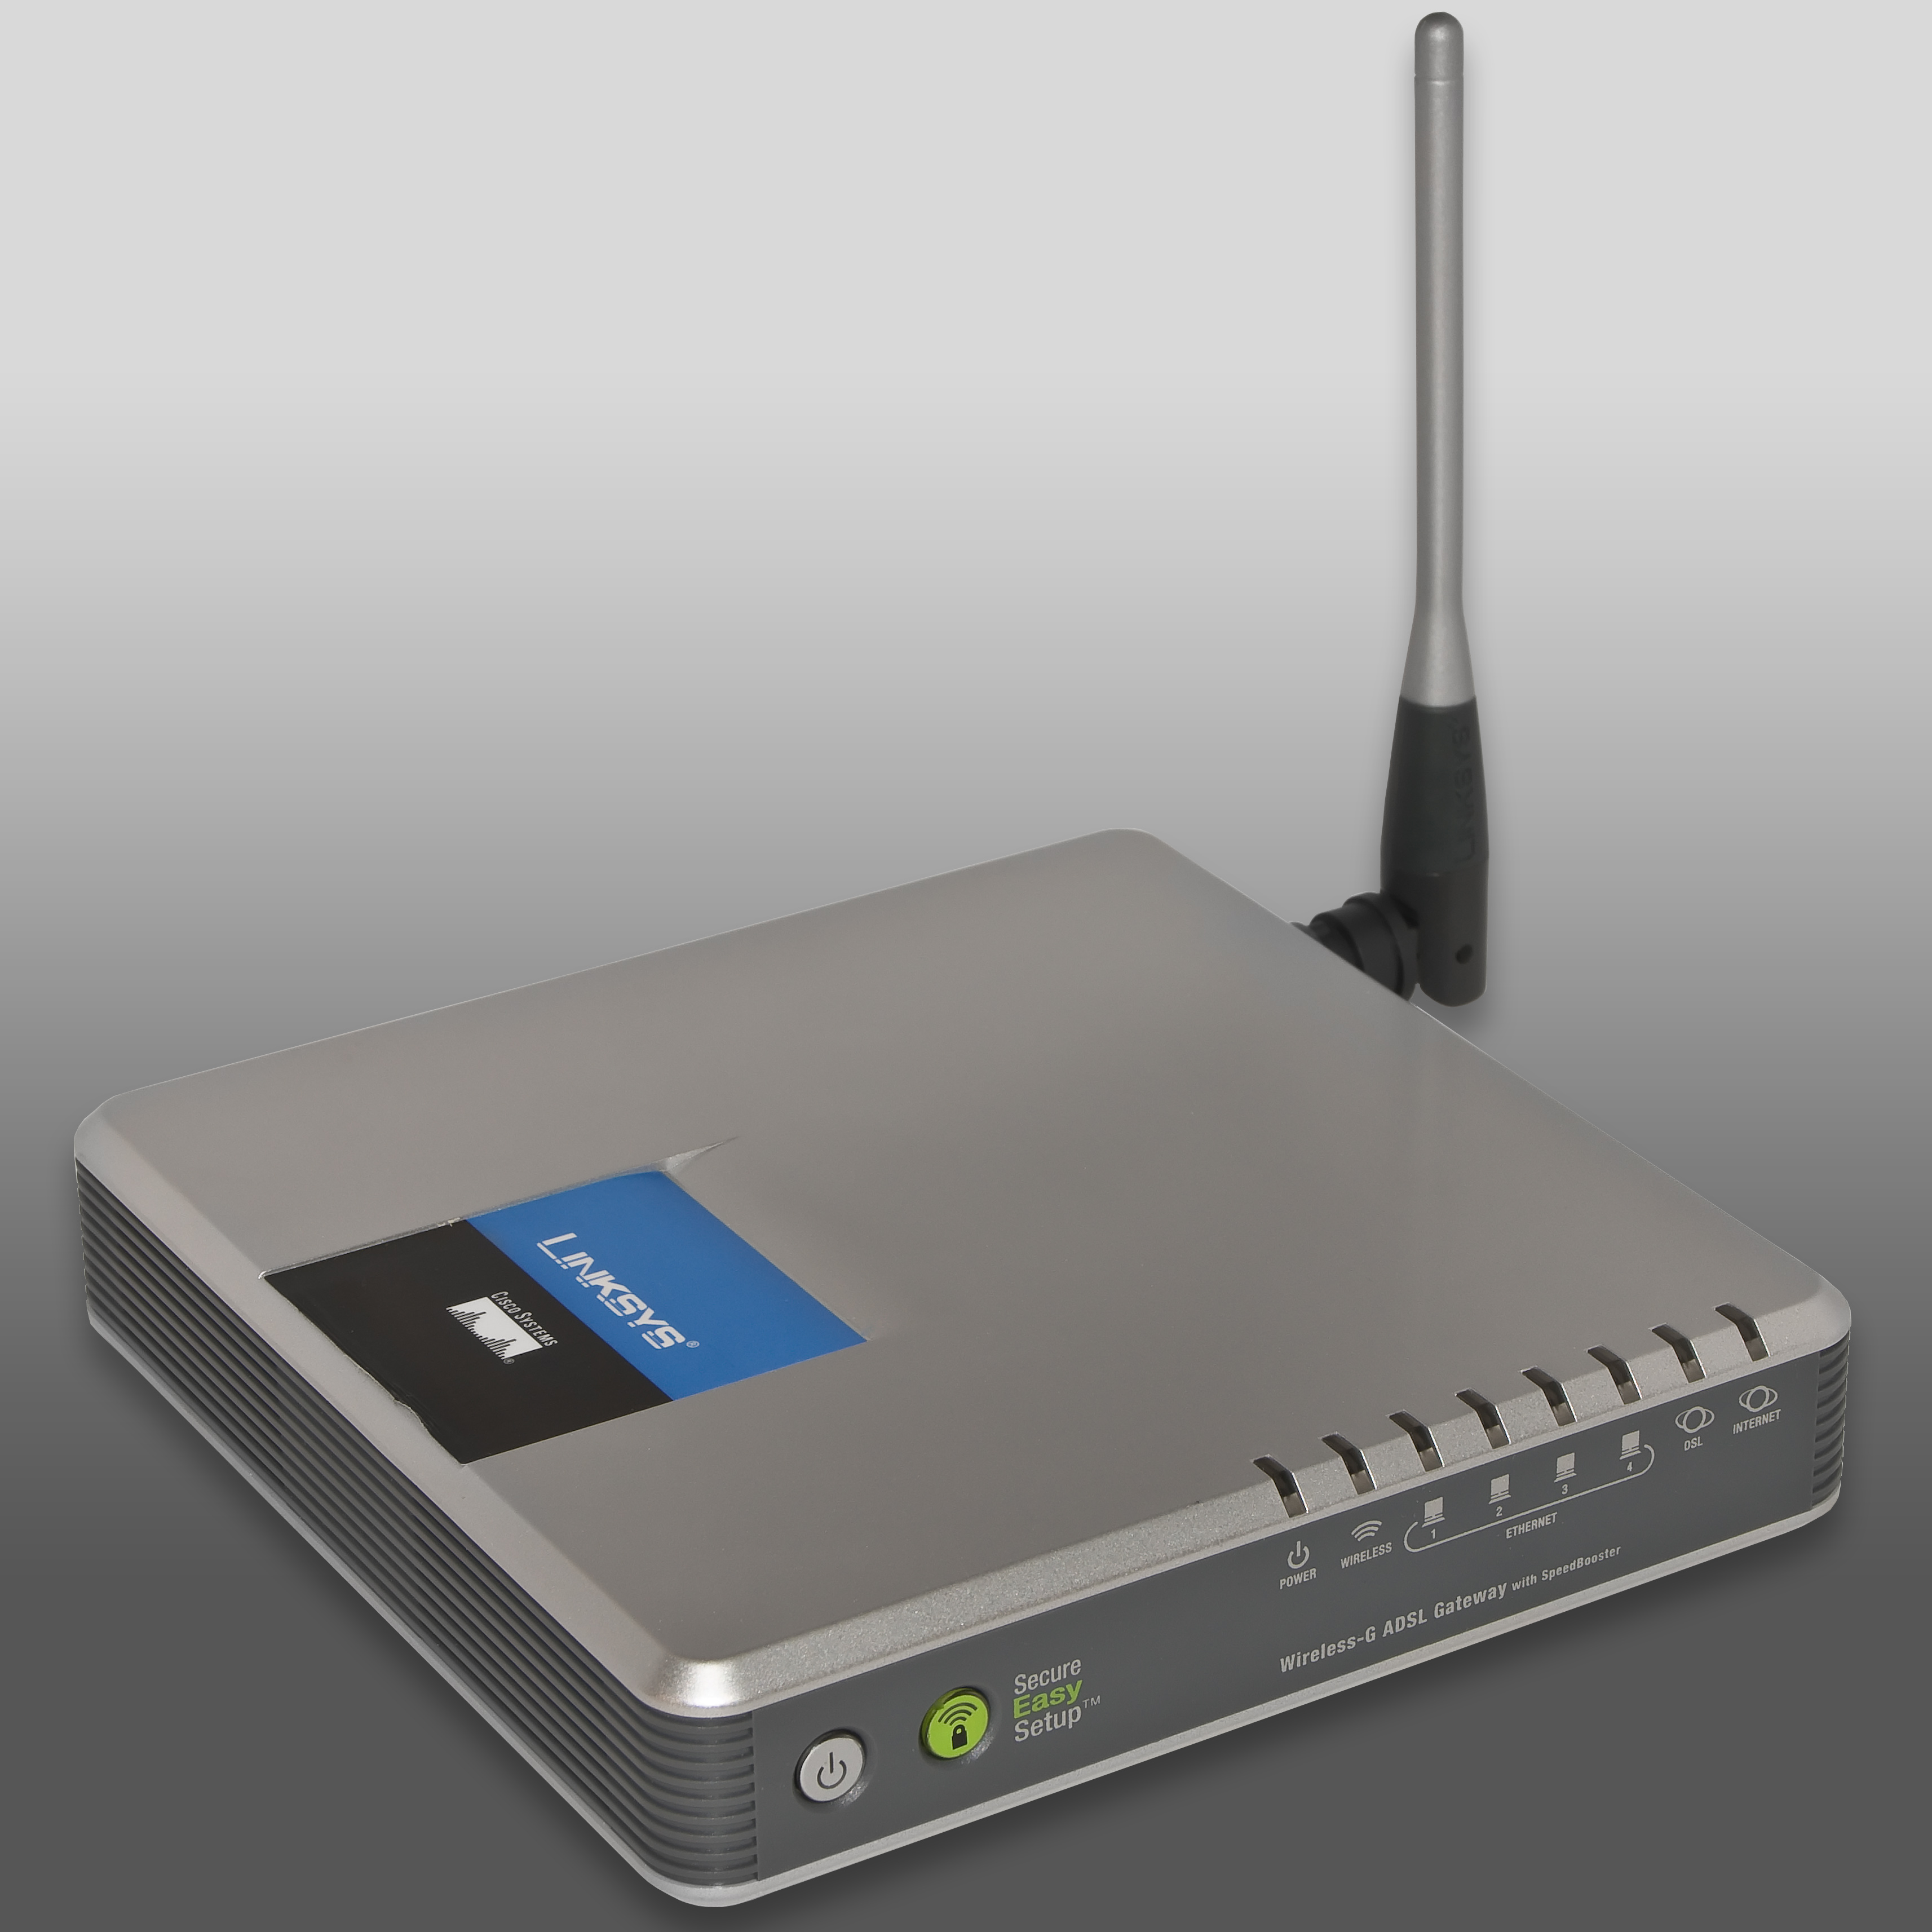 http://upload.wikimedia.org/wikipedia/commons/f/fe/ADSL_router_with_Wi-Fi_%28802.11_b-g%29.jpg